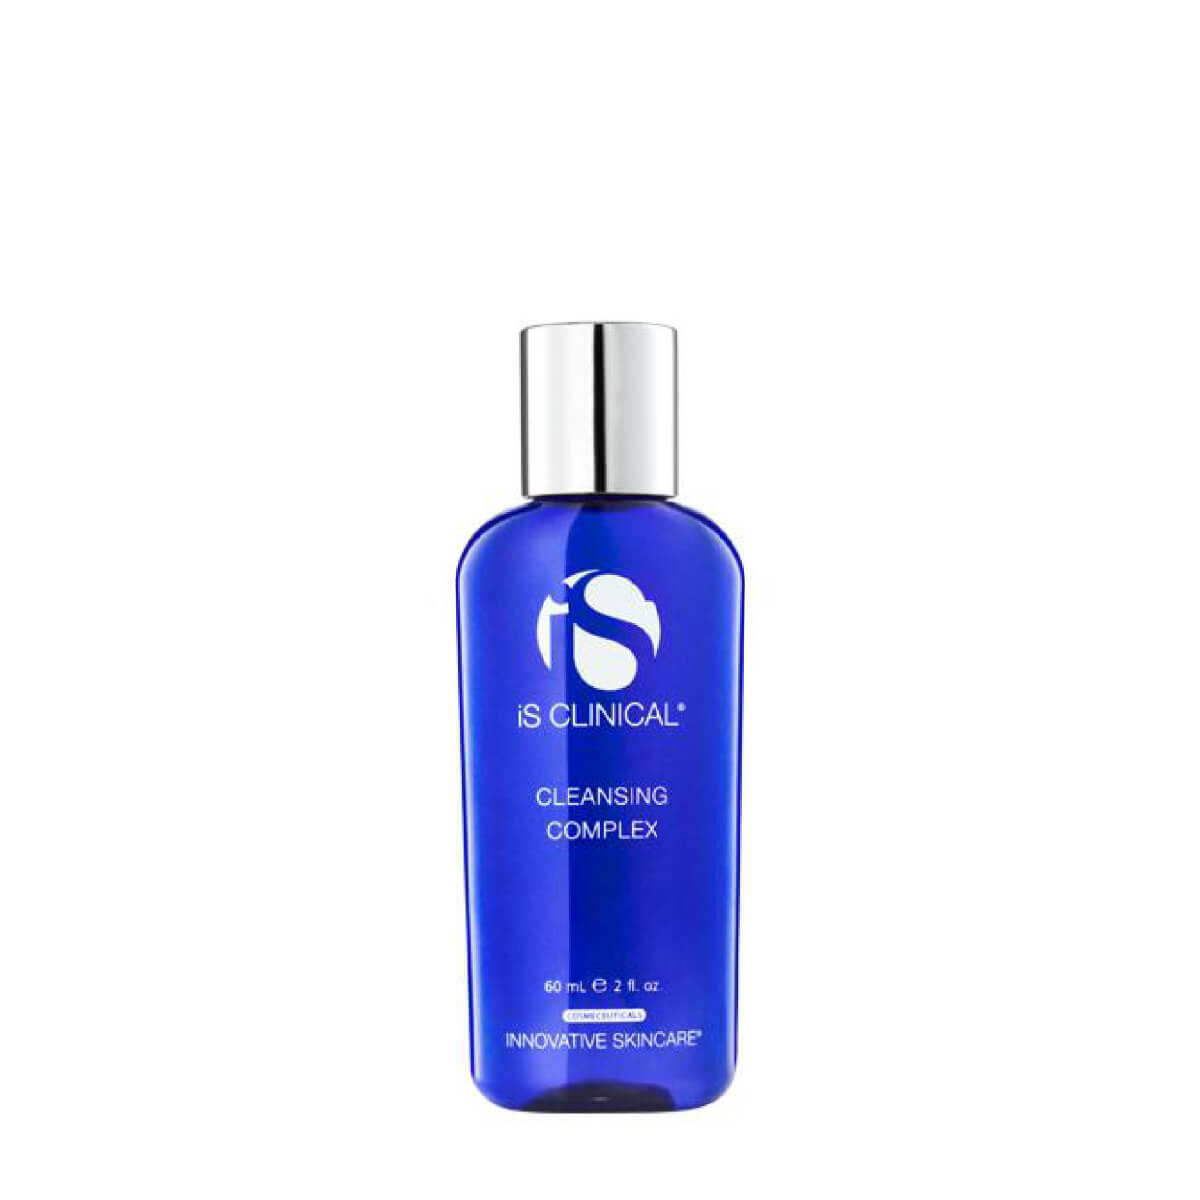 iS Clinical - Cleansing Complex 60ml